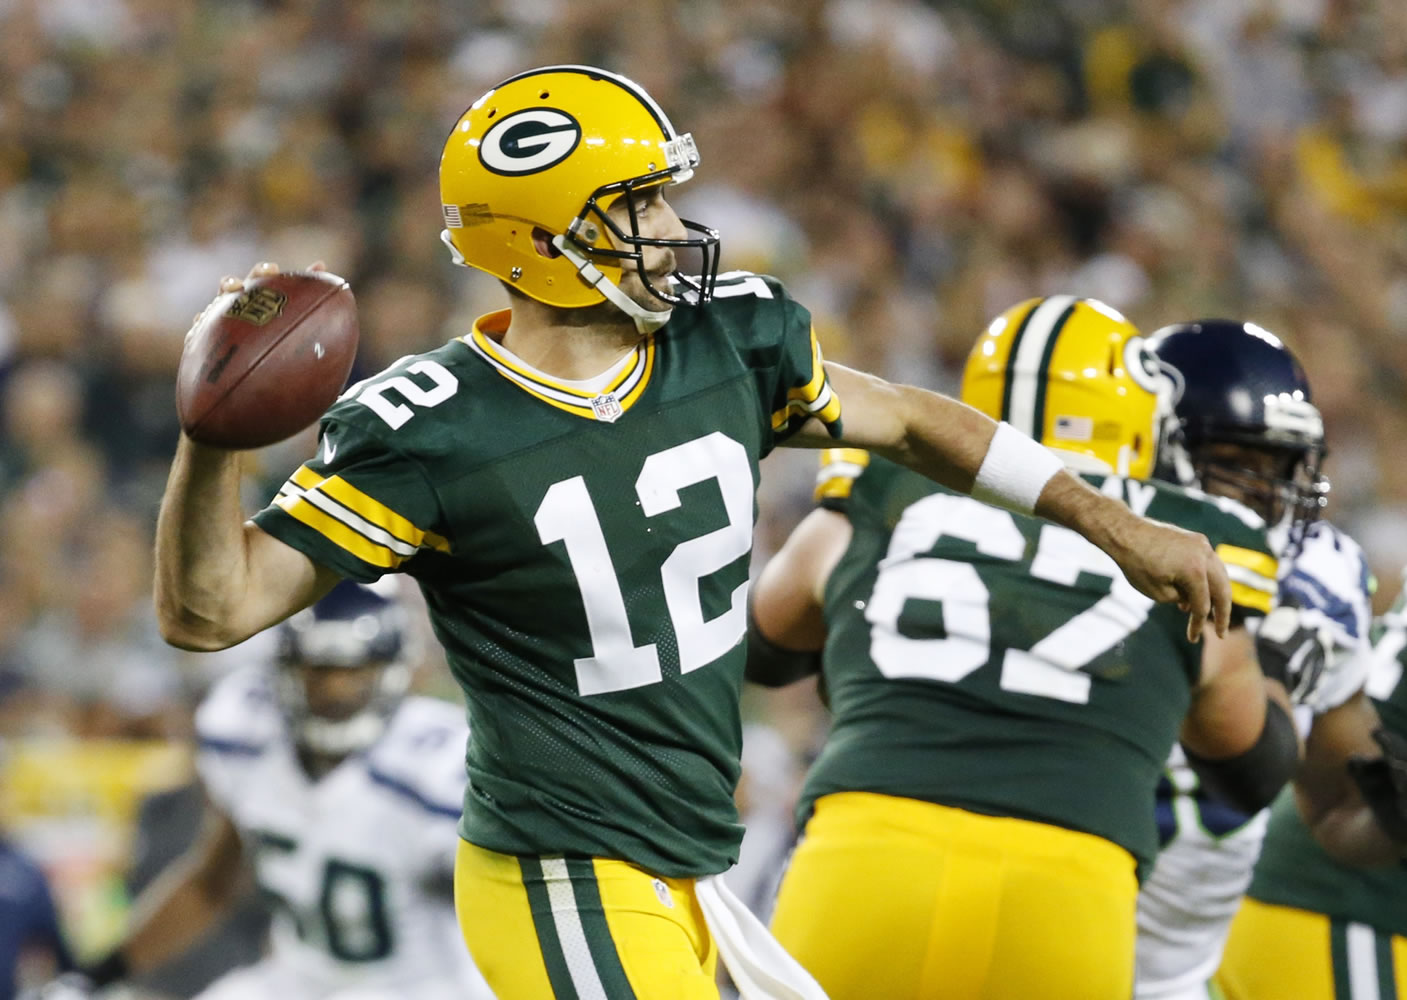 Green Bay Packers' Aaron Rodgers during the first half of an NFL football game against the Seattle Seahawks Sunday, Sept. 20, 2015, in Green Bay, Wis.